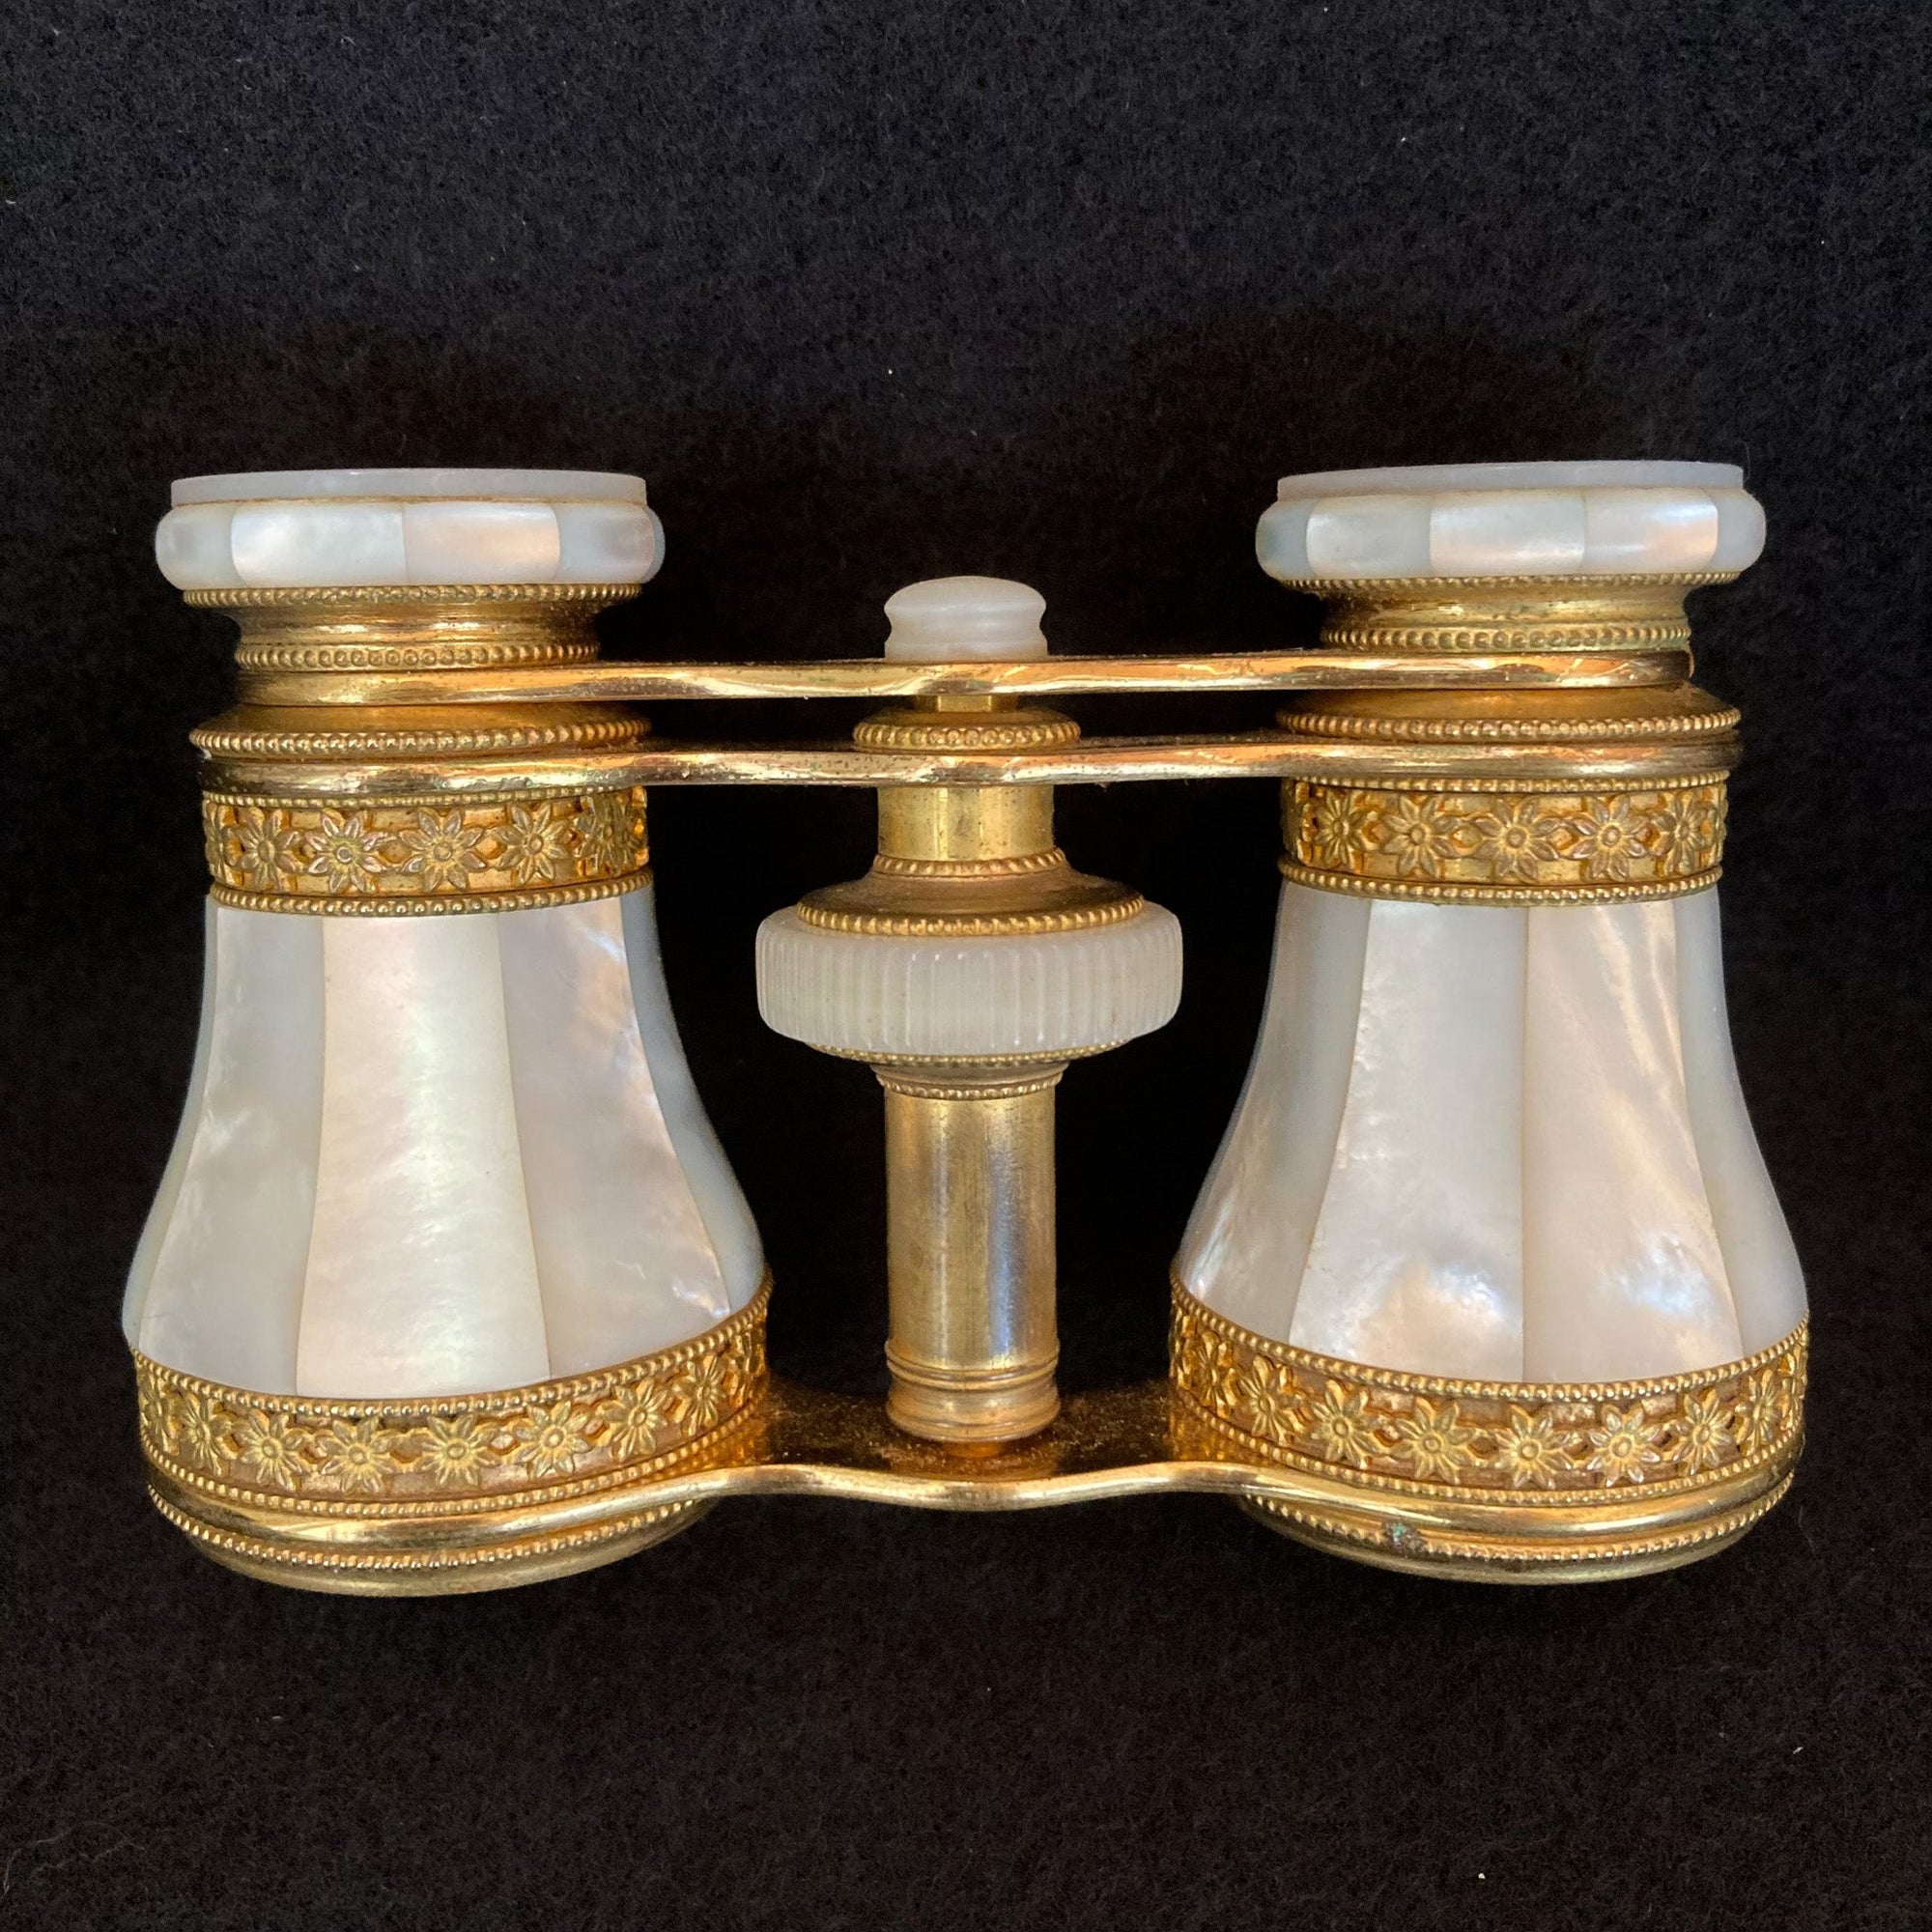 1880’s Colmont Paris Mother of Pearl Opera Glasses with Leather Case